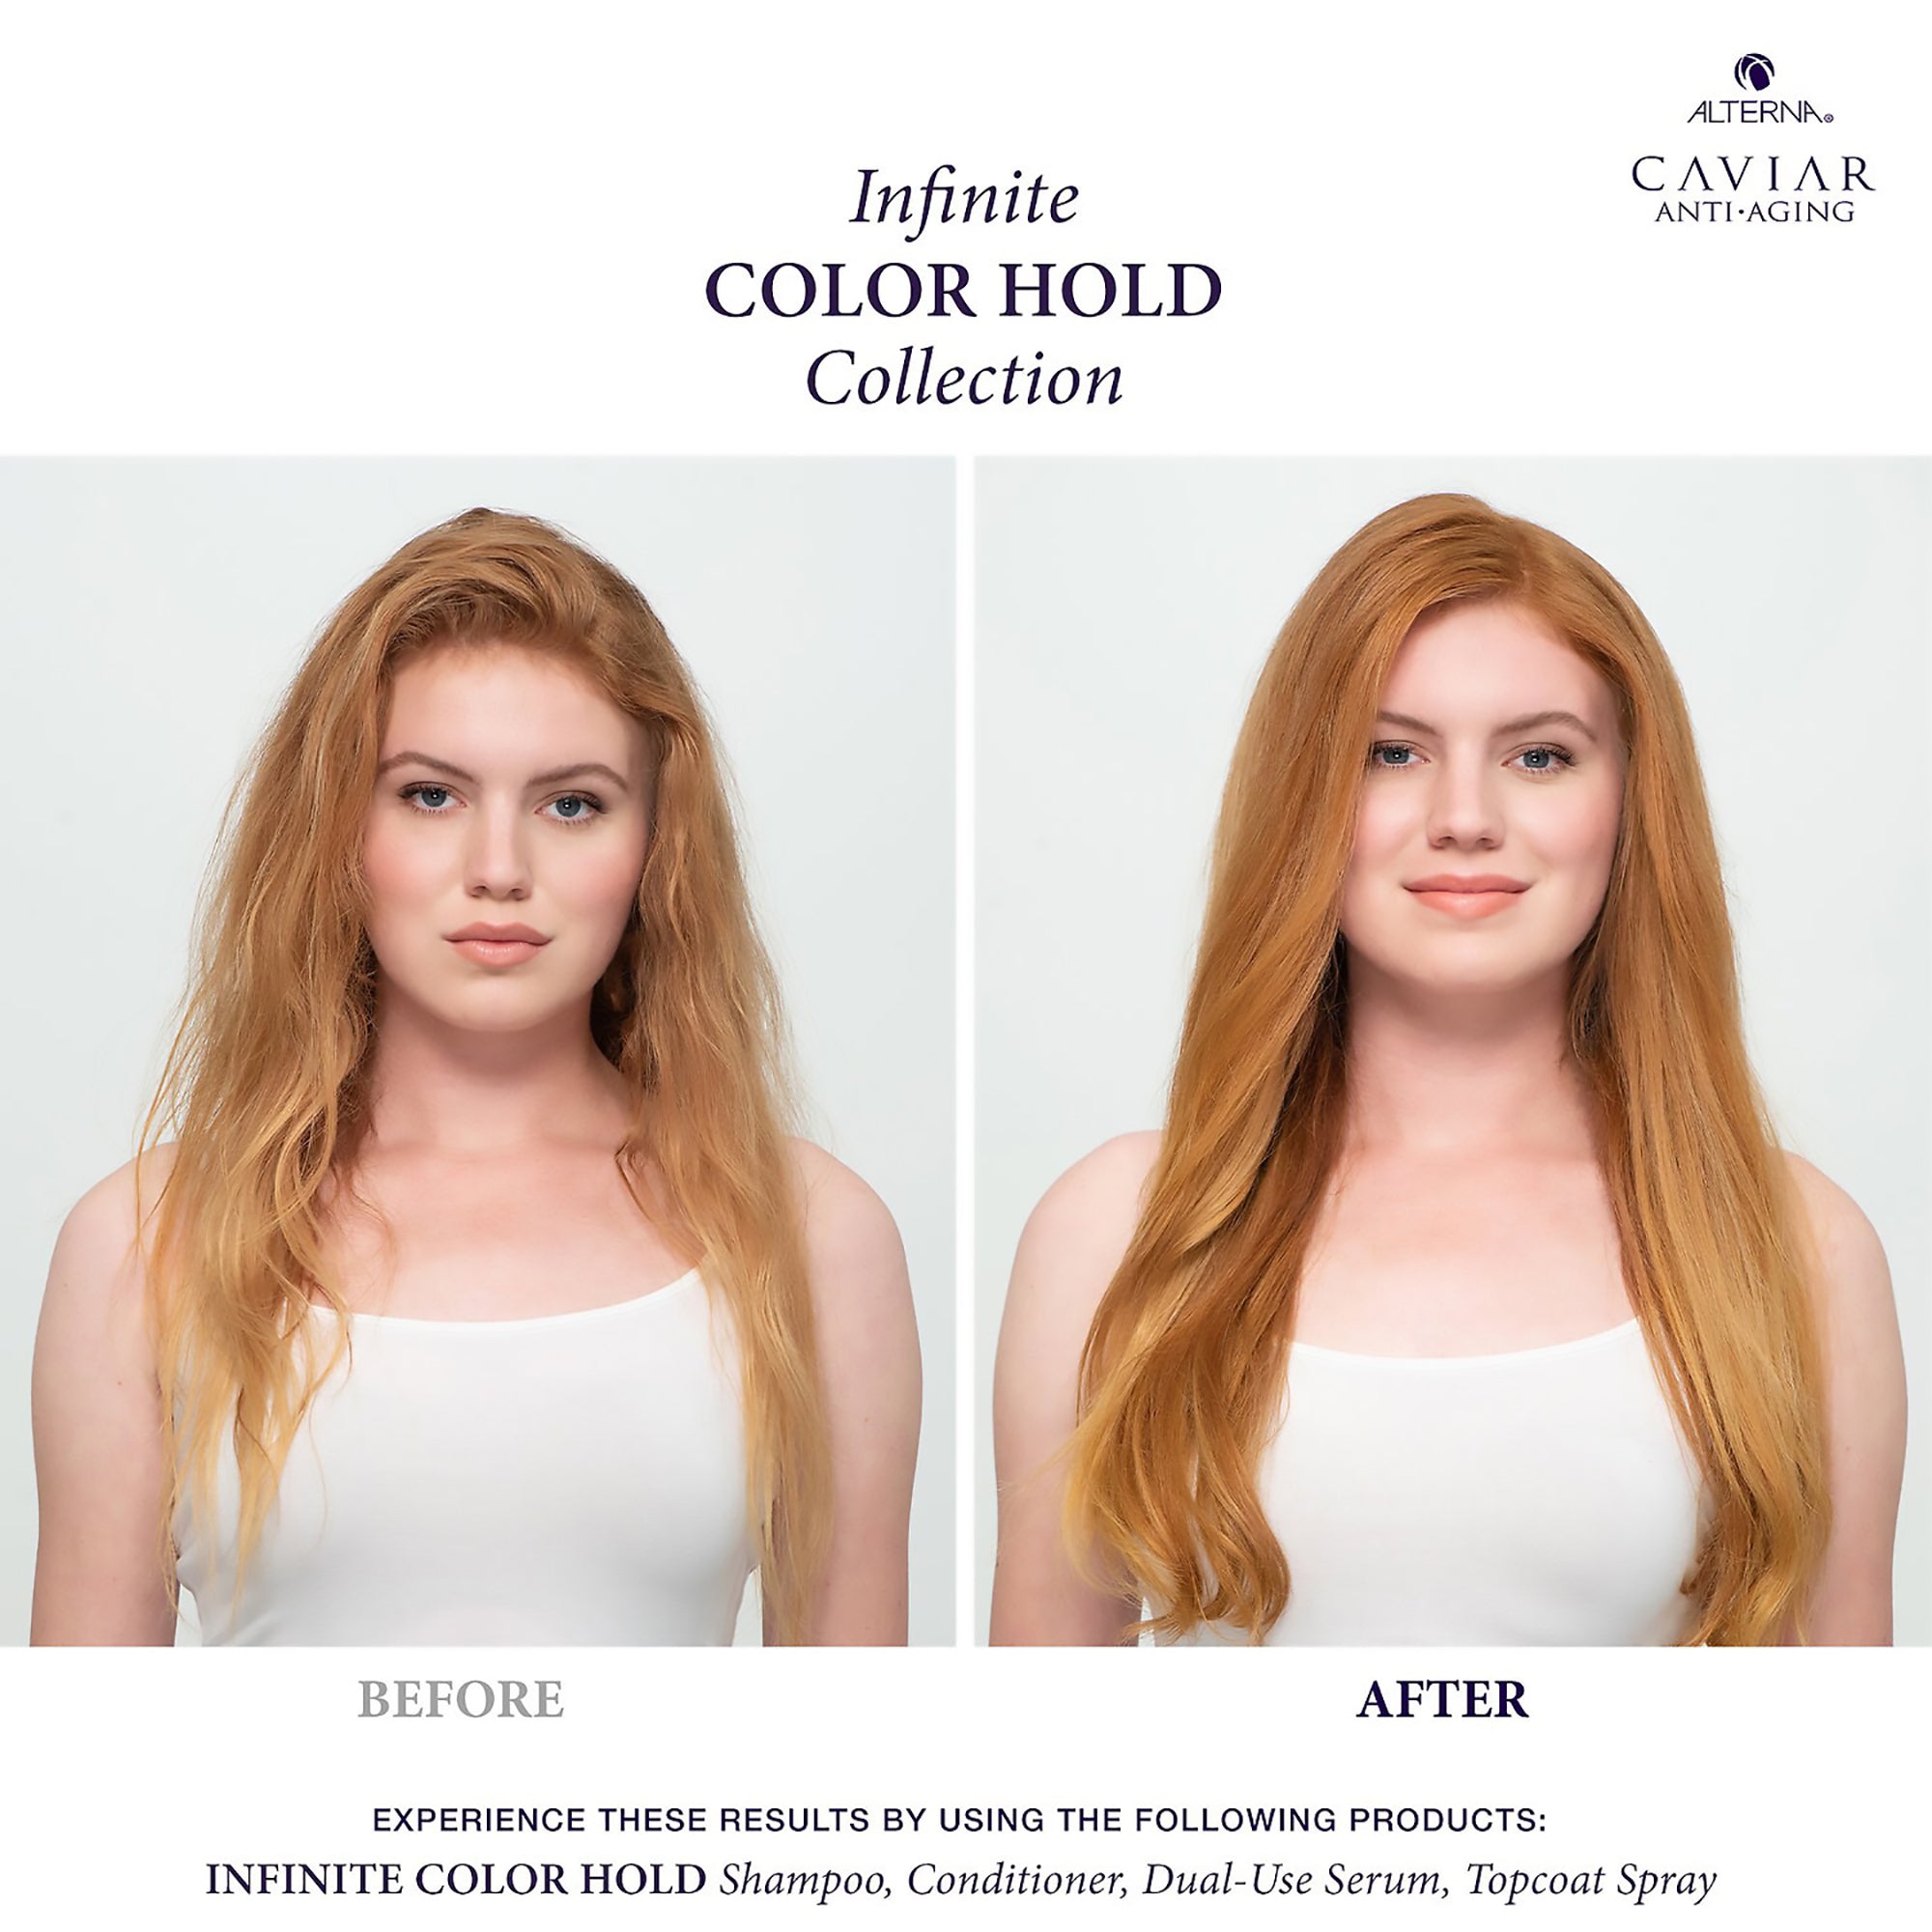 Alterna Caviar Anti-Aging Infinite Color Hold - Planet Beauty